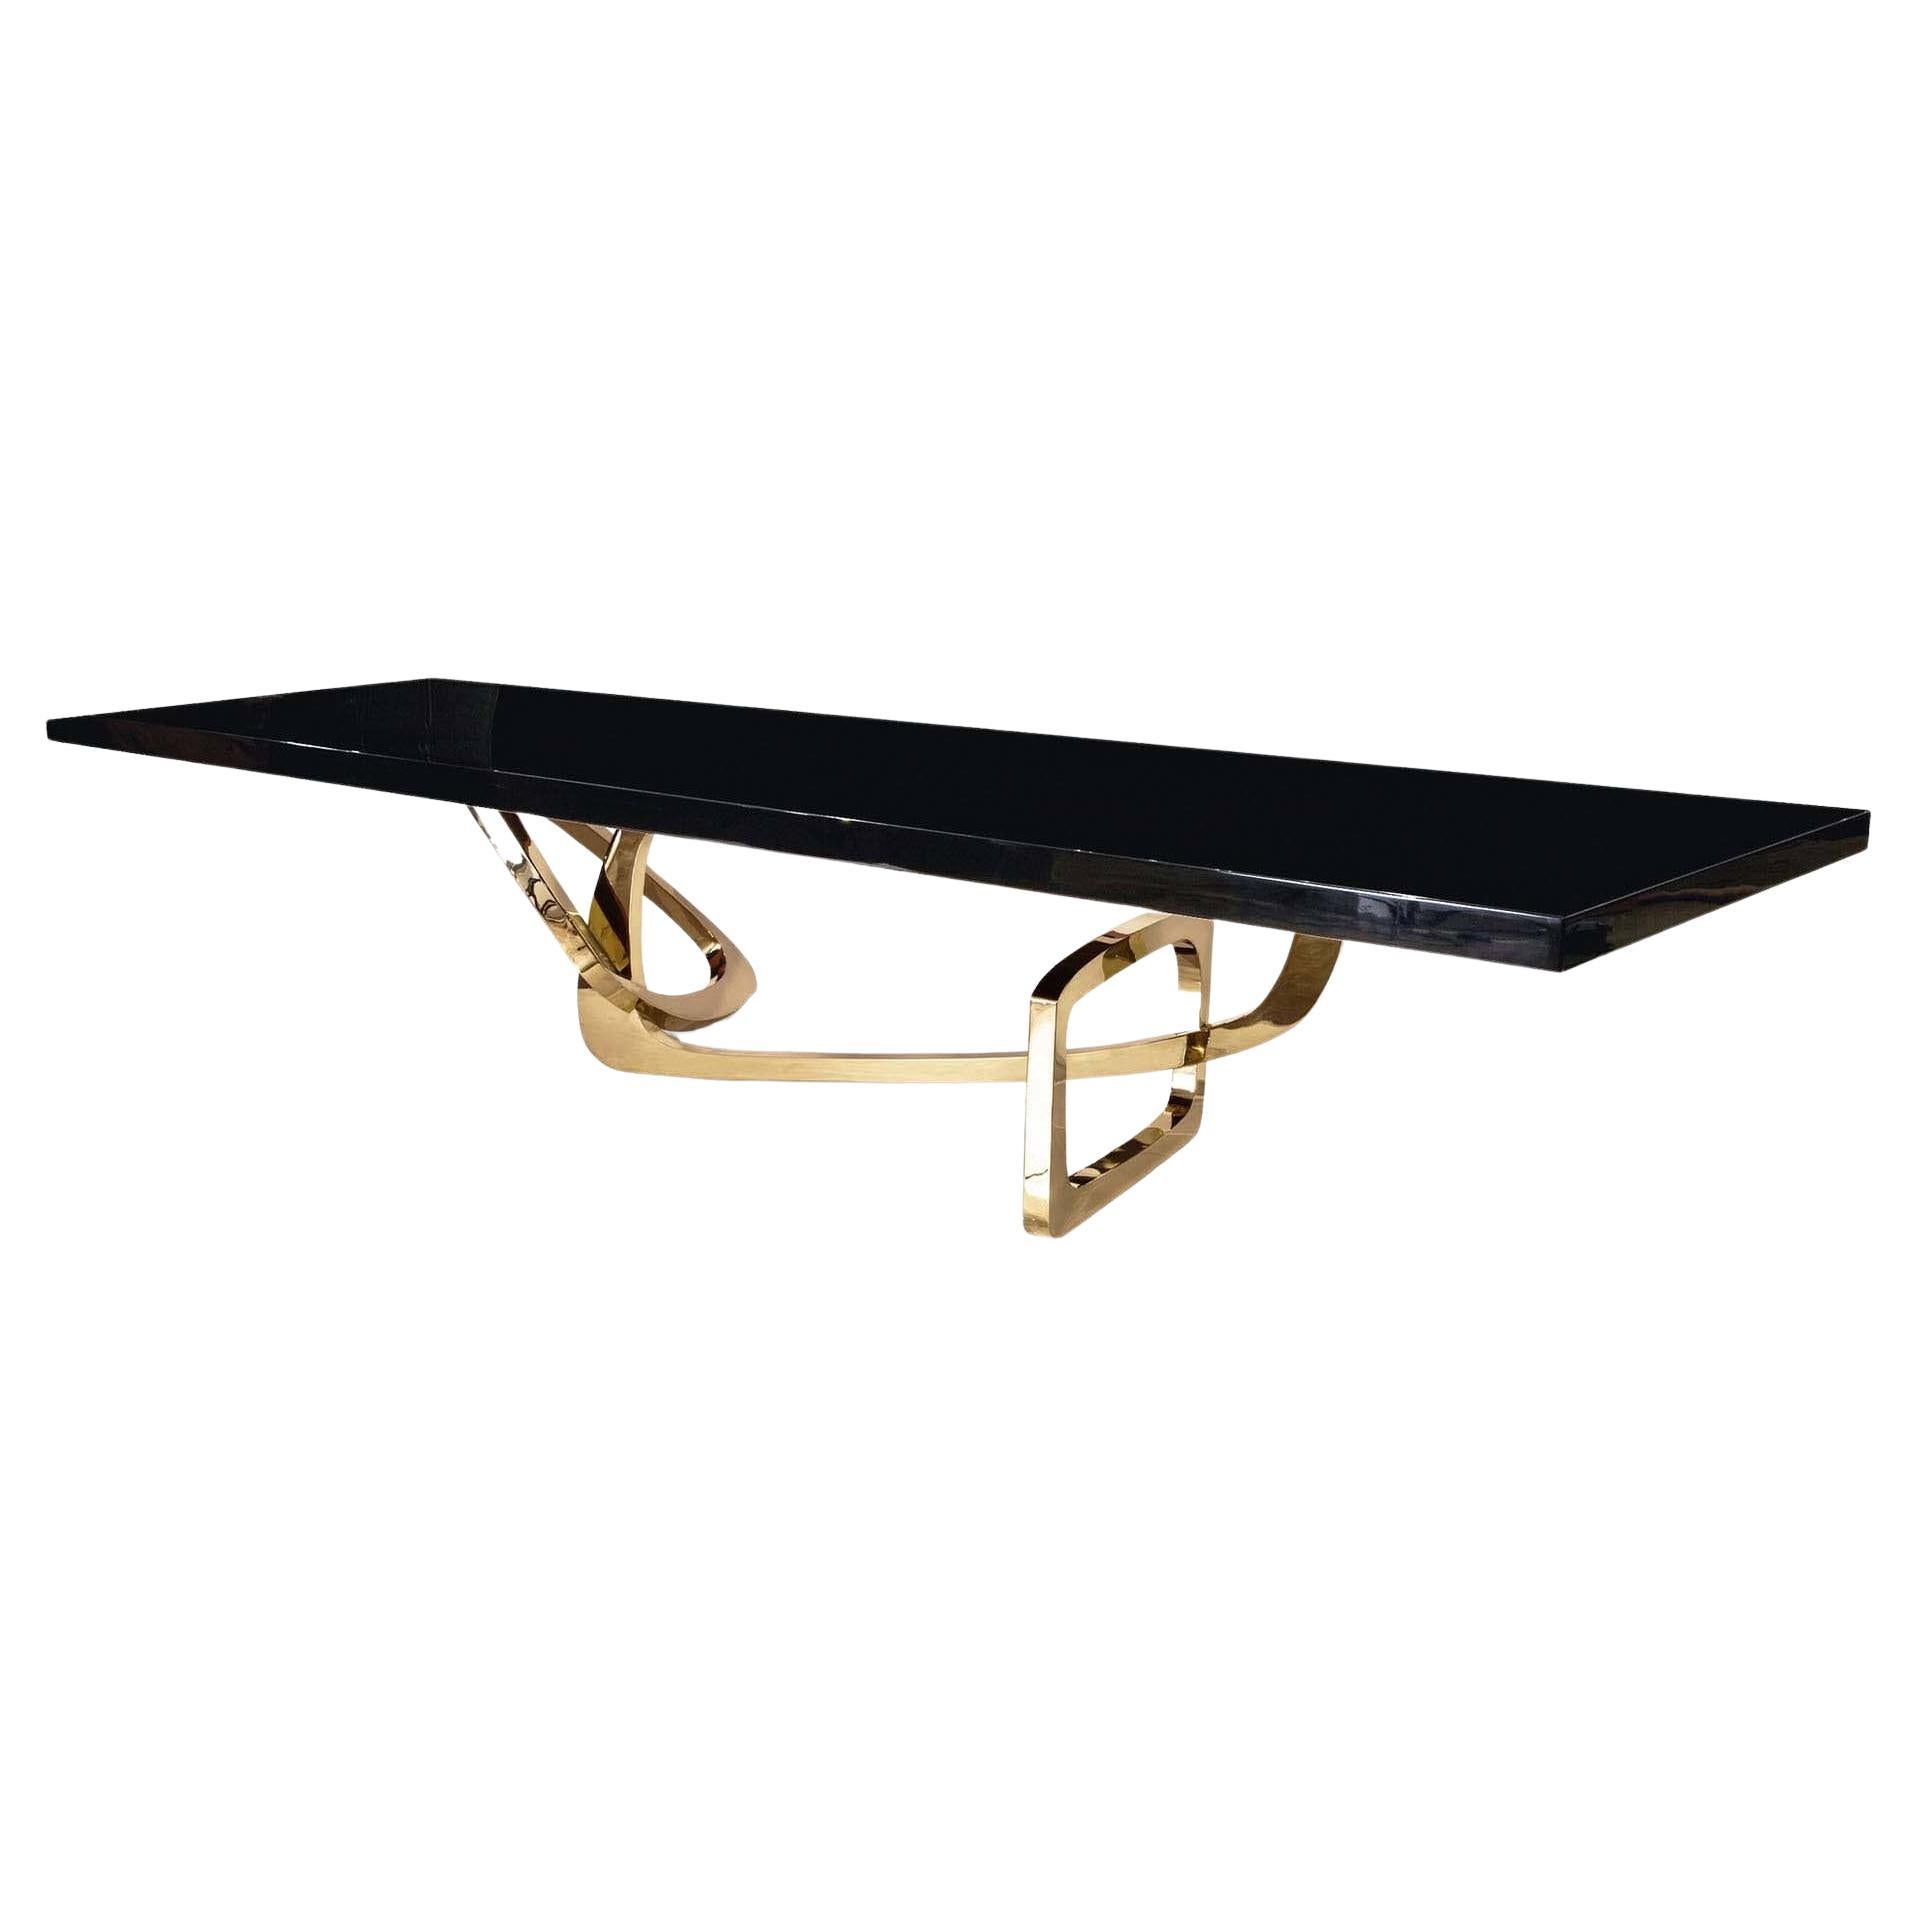 Bangle Dining Table: Bespoke Dining Table with Black Lacquer Top  For Sale